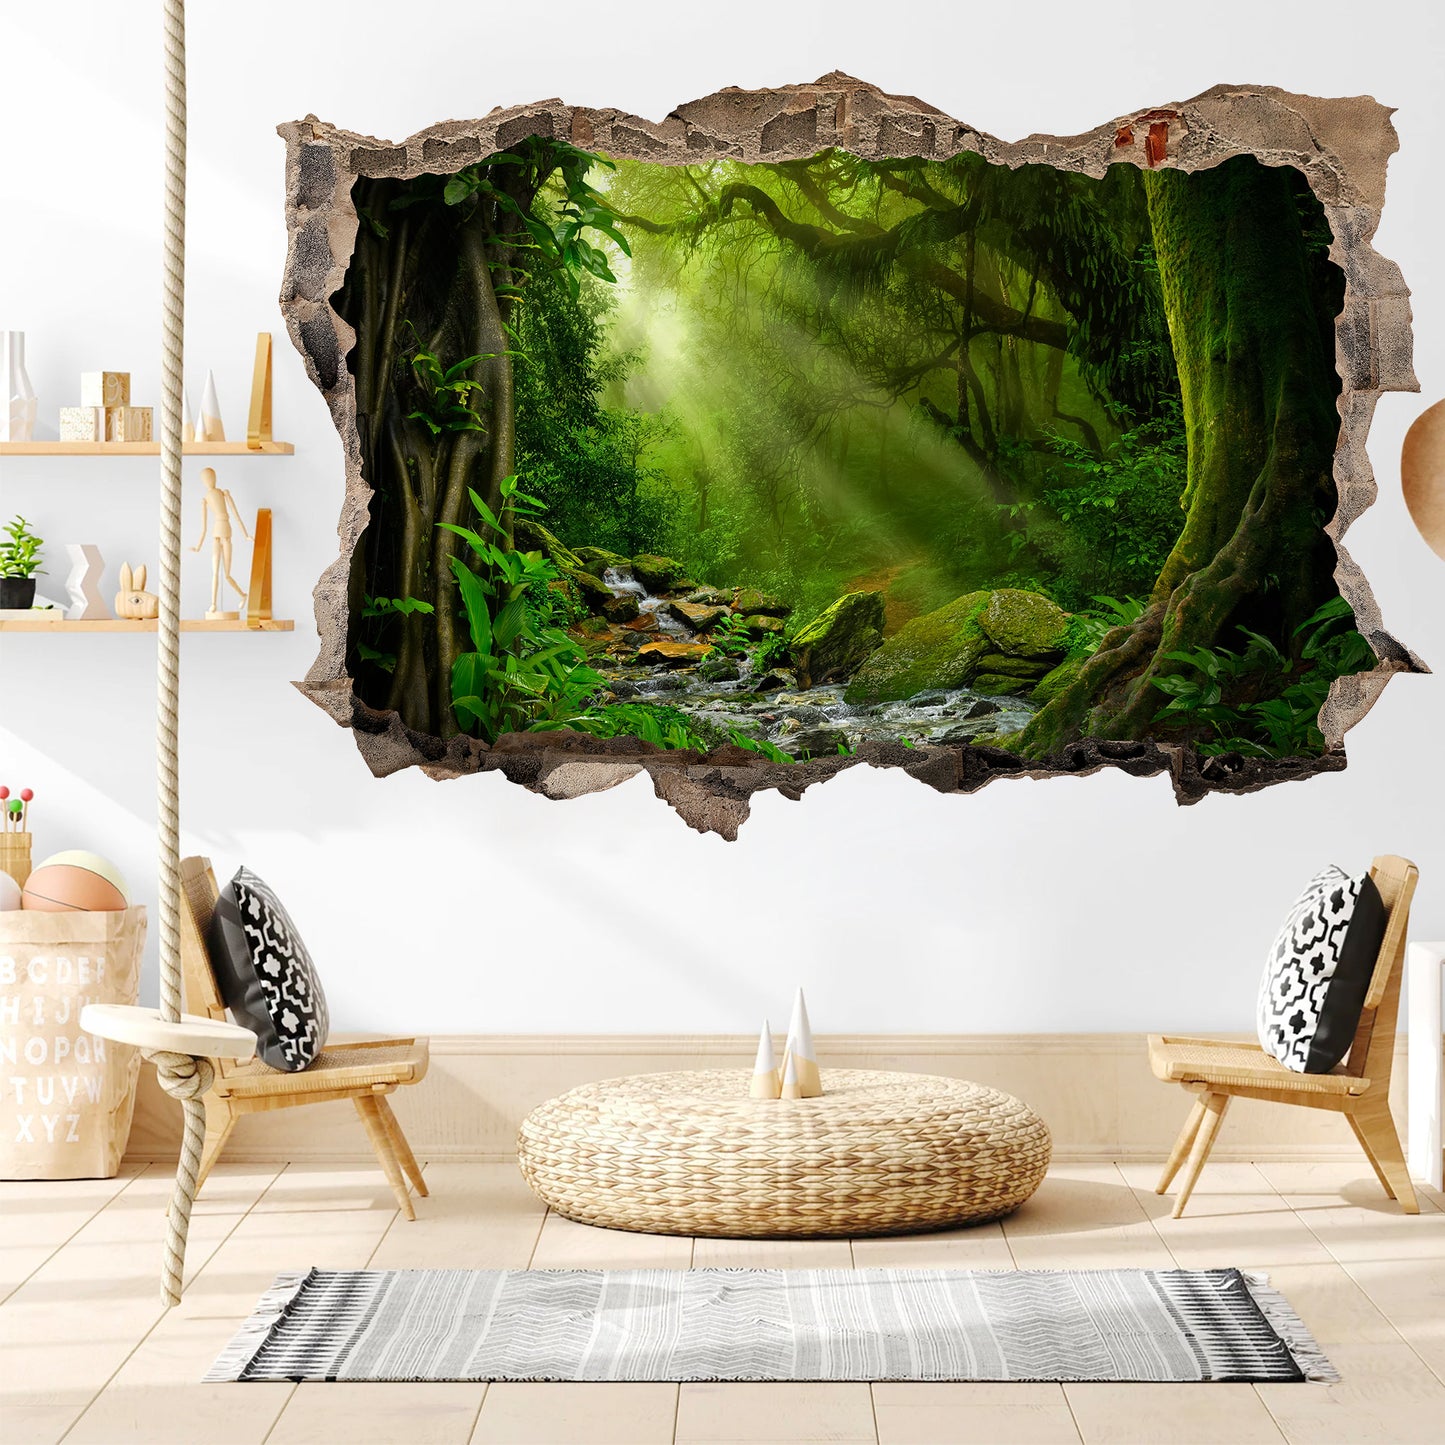 Sunlight Jungle Radiance 3D Broken Wall Decal - Removable Peel and Stick - BW010